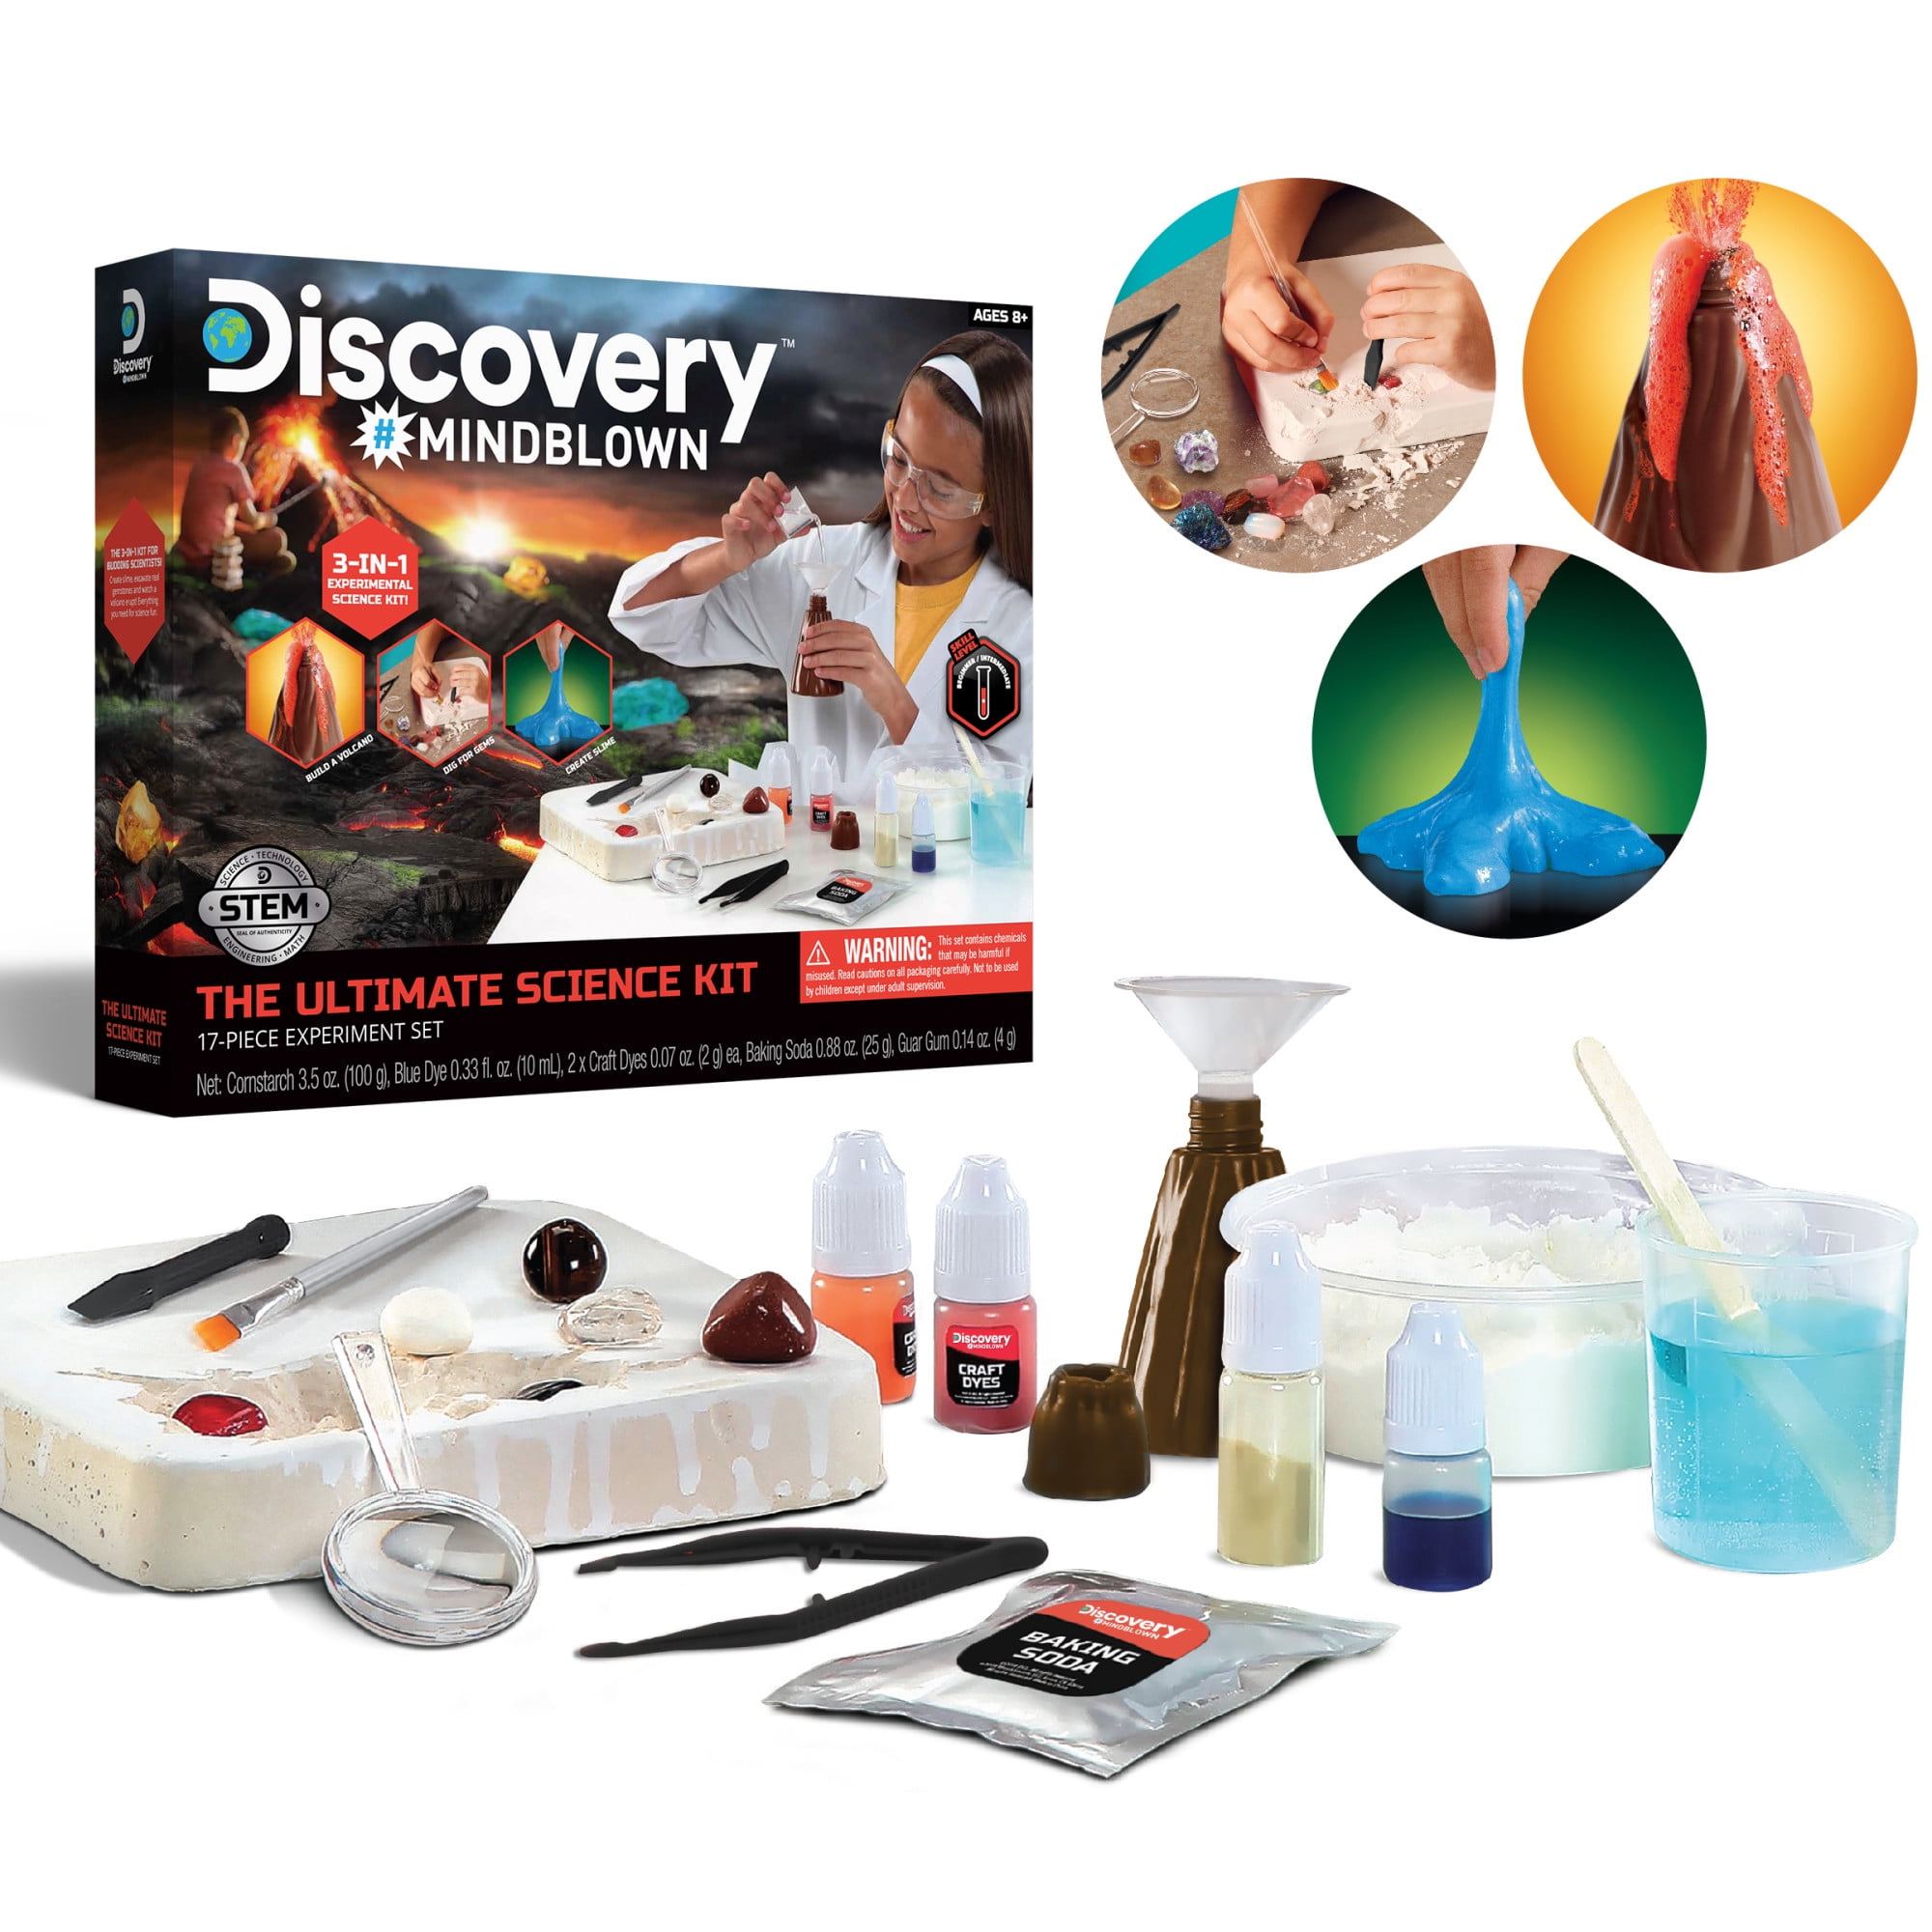 Discovery #Mindblown Ultimate Science Experiment 17 pc Kit, Perform 4 Experiments! Make Slime, Build a Volcano & Dig for Gems, Educational Toy for Children, Learn Chemistry & Excavation, Ages 8+